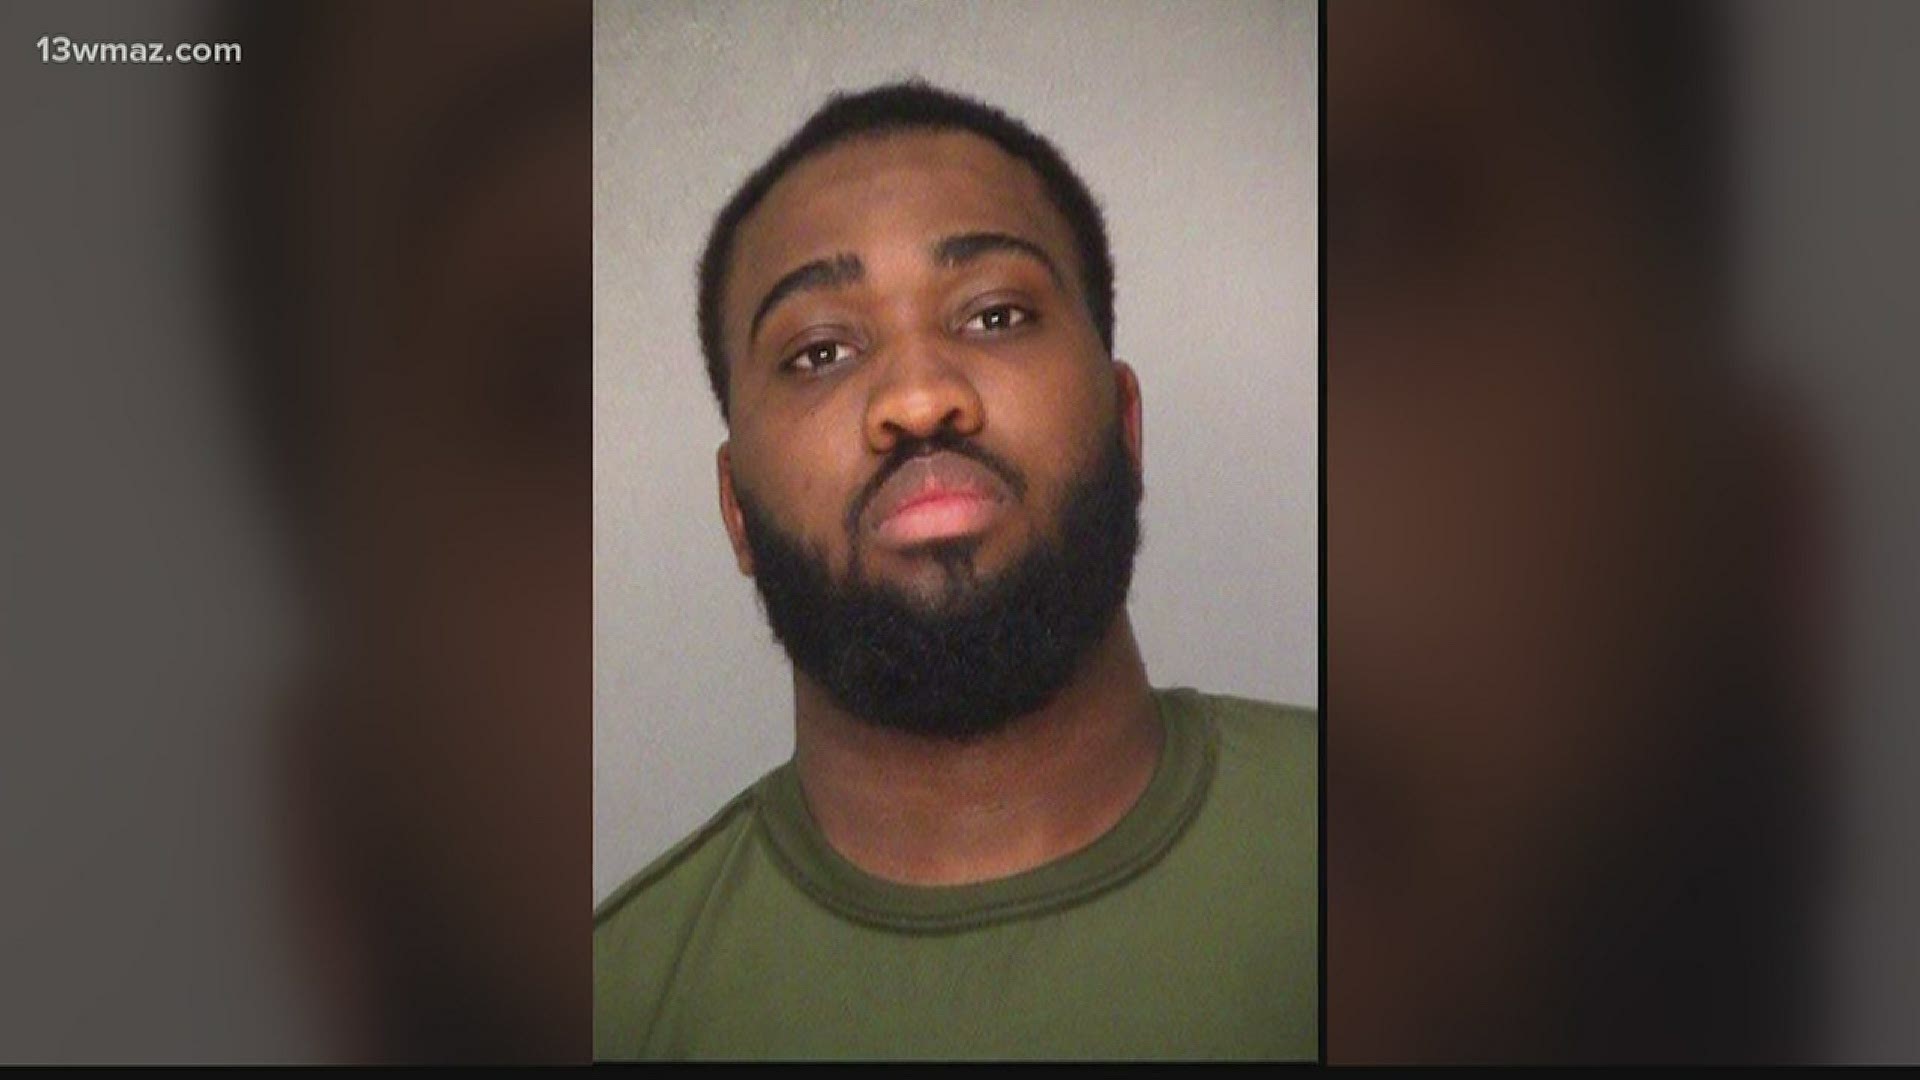 Donavon Scott-Sinclair is accused of killing 25-year-old Devontae Tennyson in a parking lot near Midtown Daiquiri Bar & Grill on Log Cabin Drive.